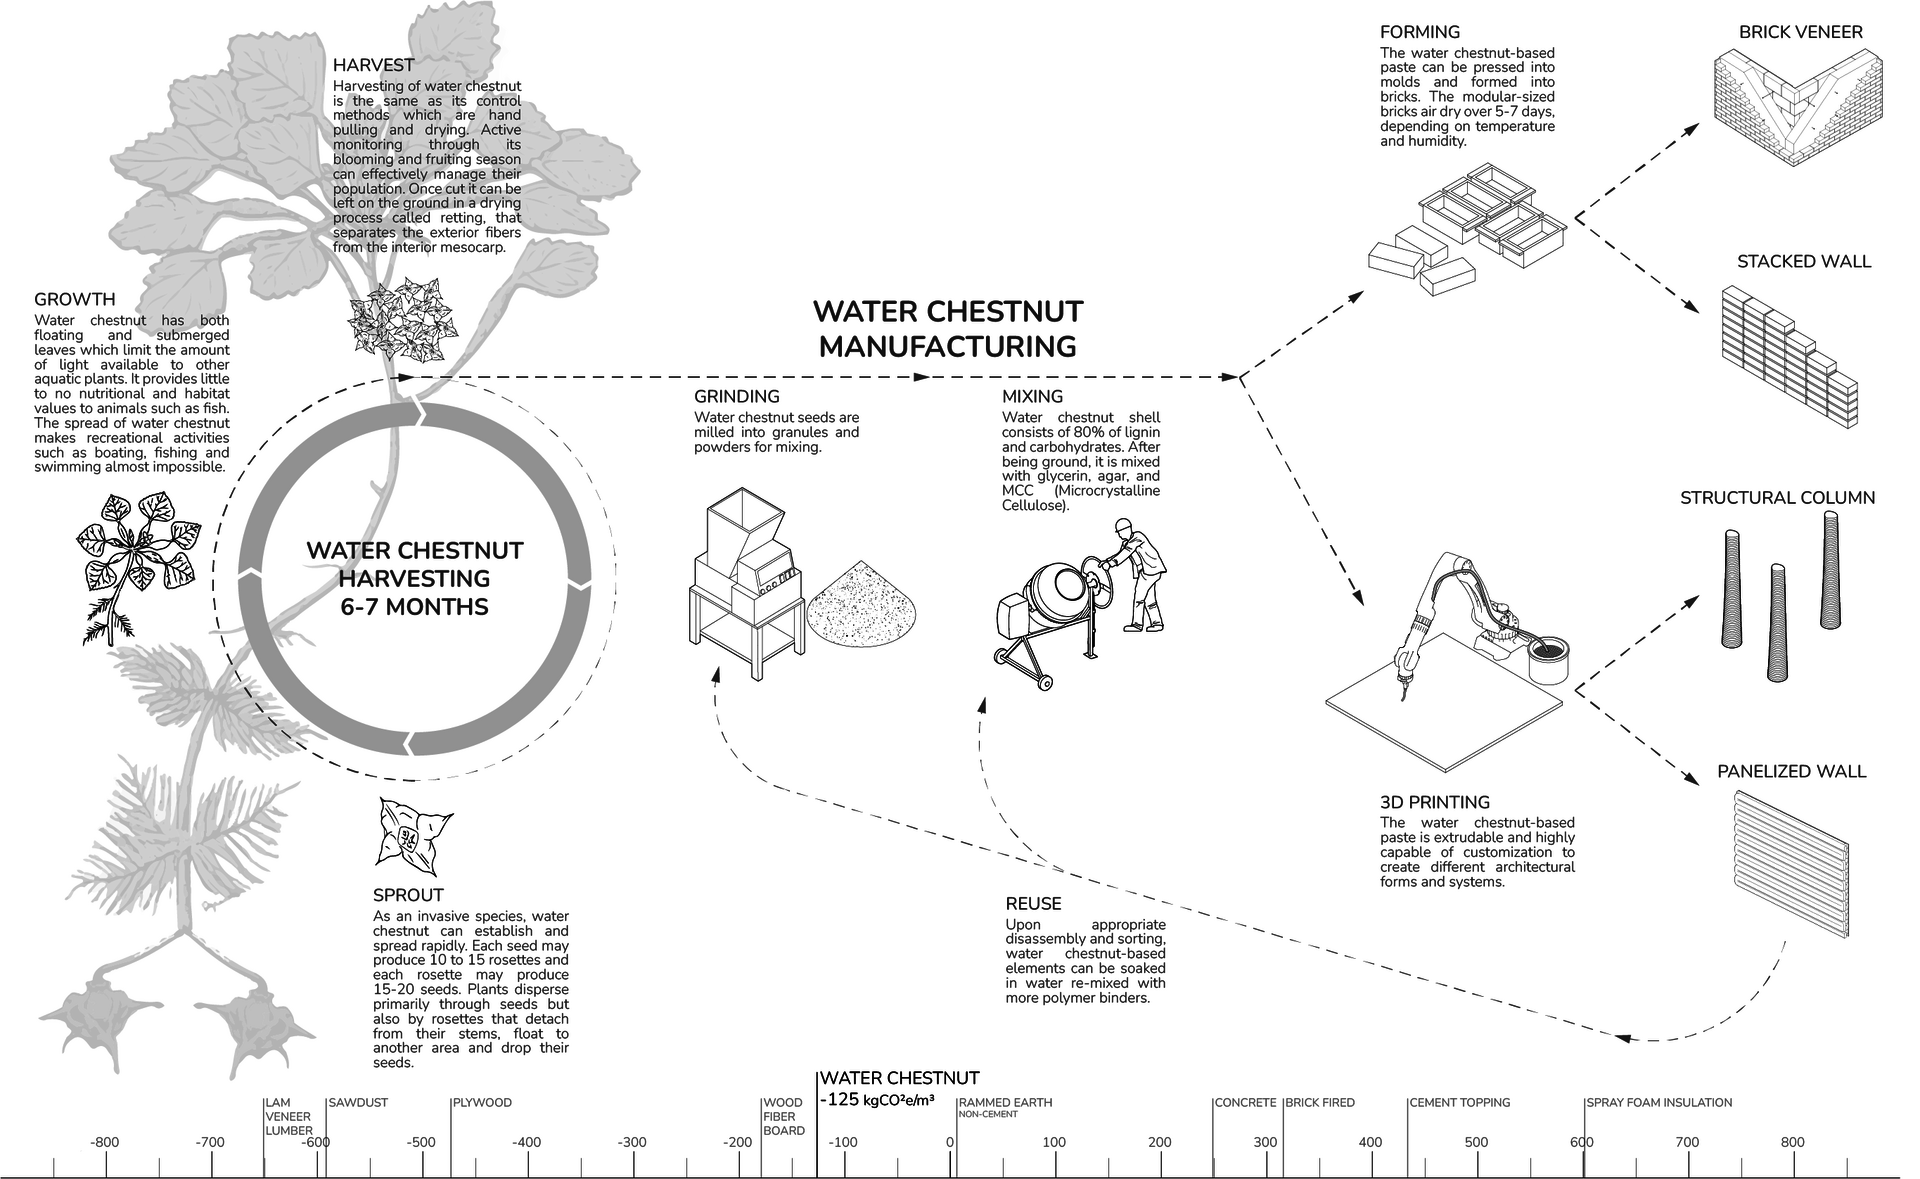 The life cycle diagram illustrates water chestnut growth and harvest, its manufacturing process (grinding and mixing), potential architectural applications, and an estimated scale of its carbon sequestration ability.